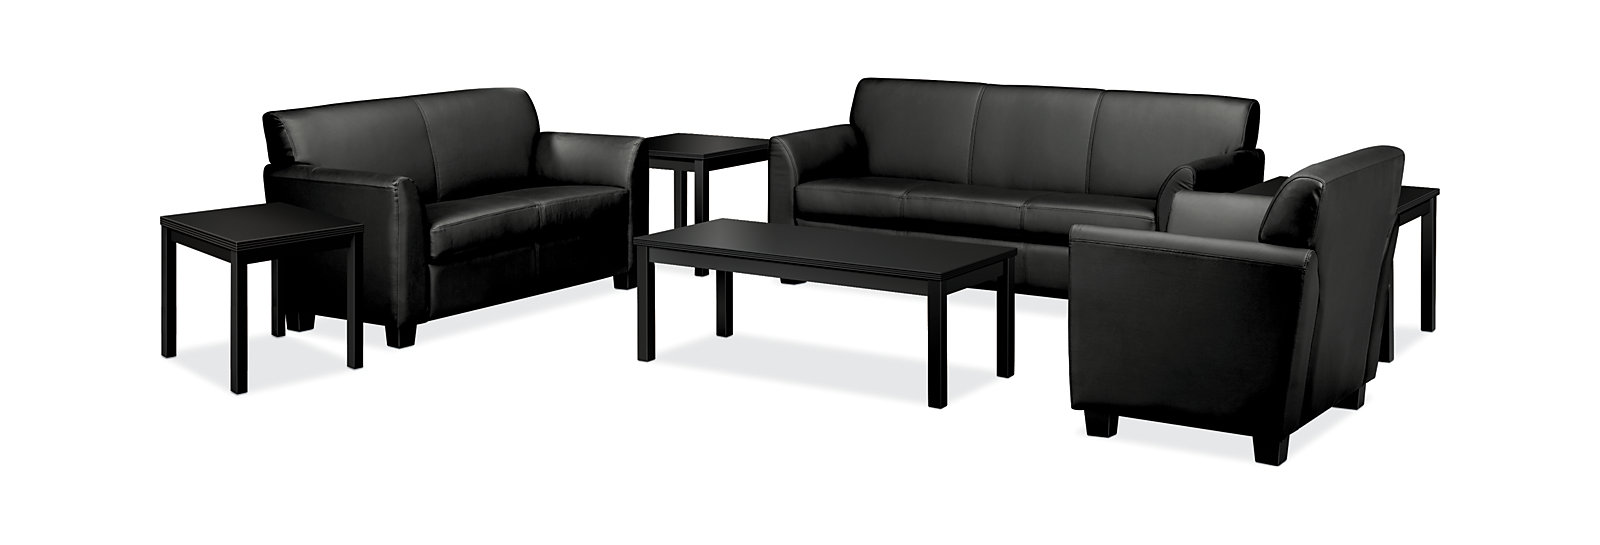 Classic Seating for four-HBLLOUNGE-image